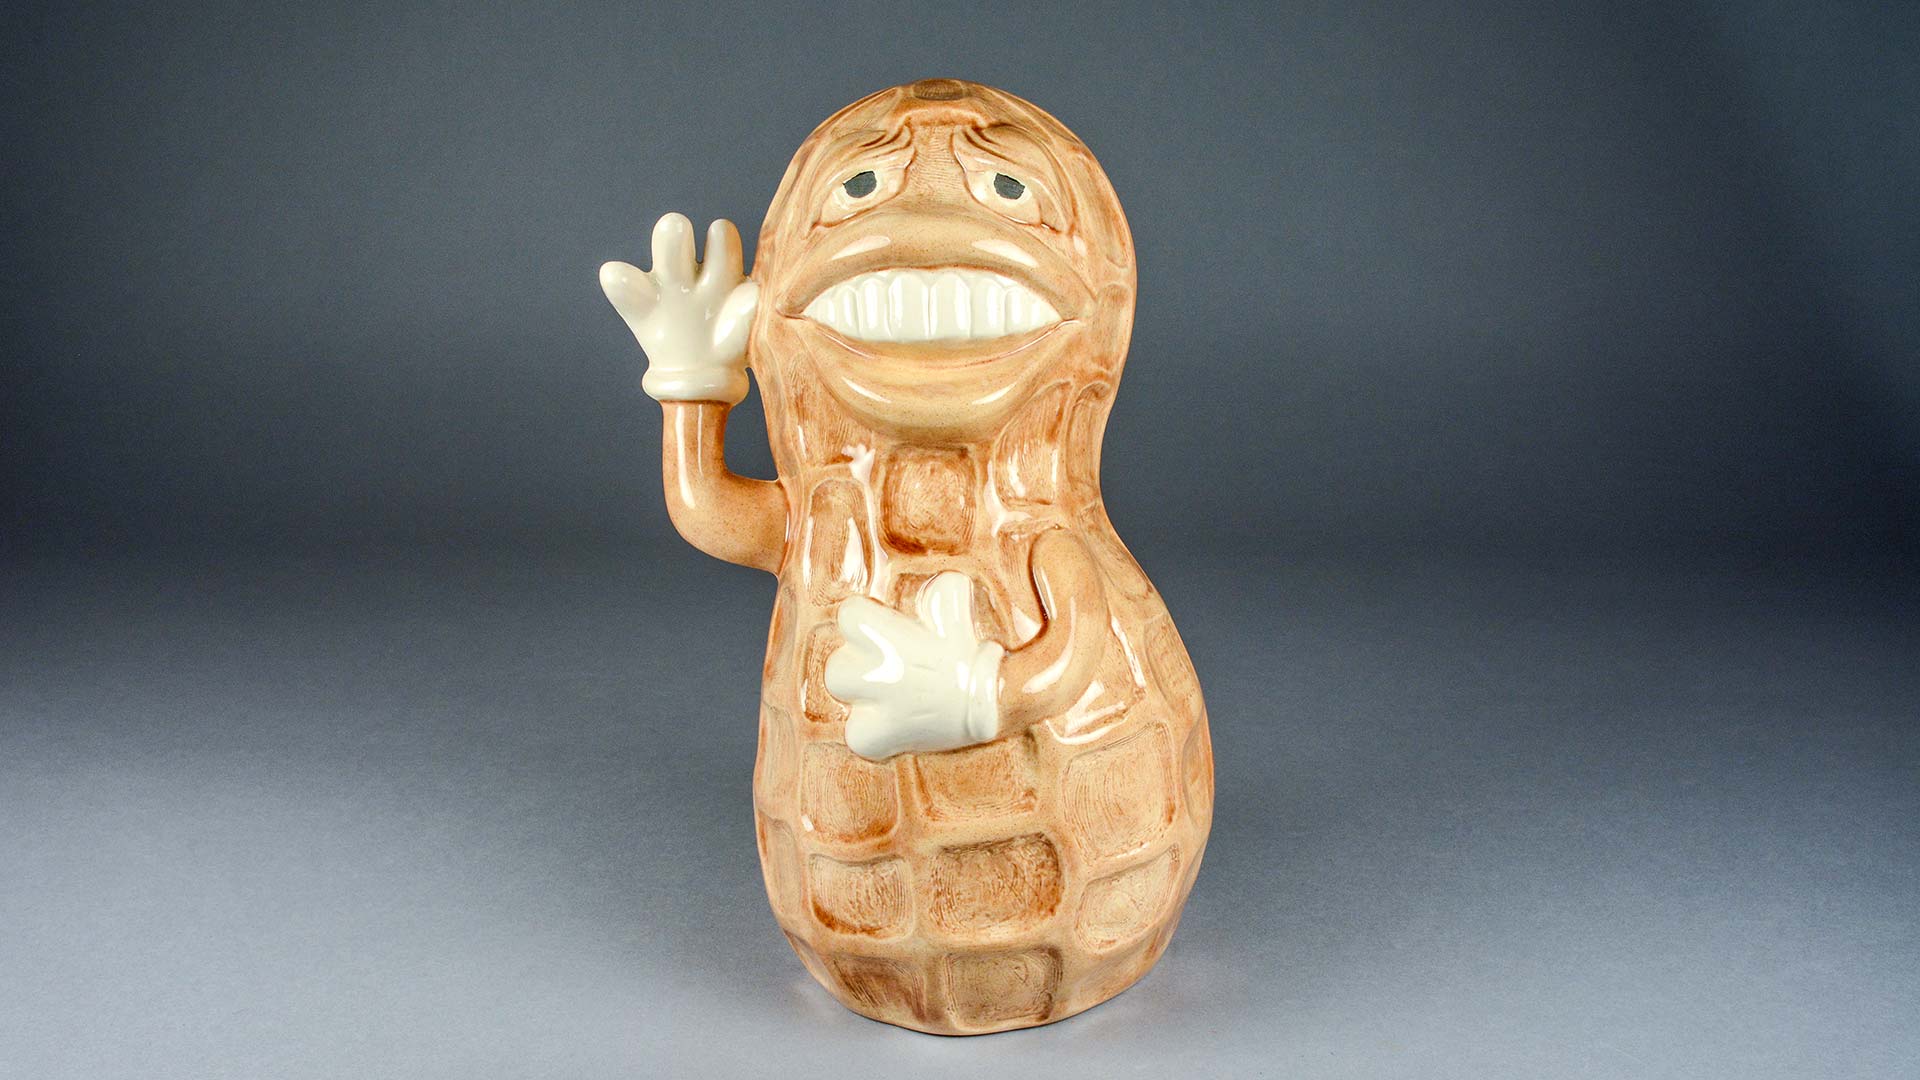 ceramic peanut sculpture with a comical smiling face, large lips, and a waving hand